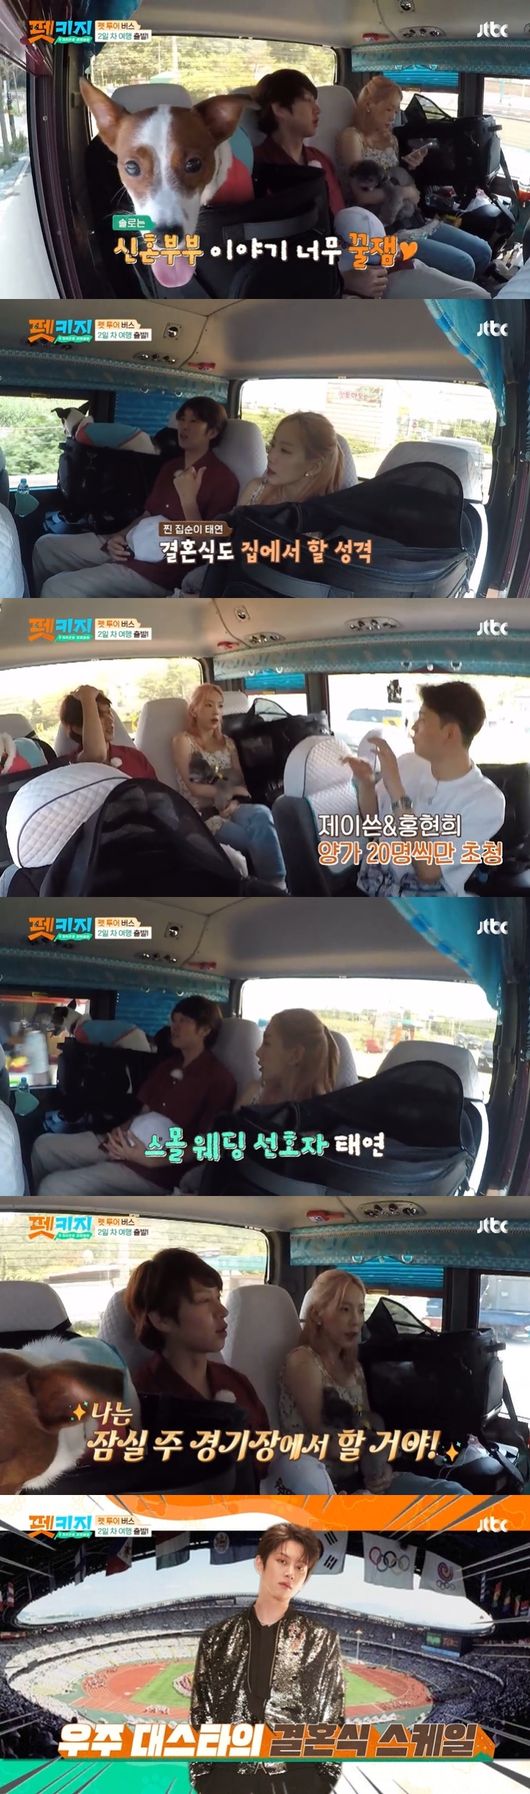 Taeyeon and Kim Hee-chuls marriage talk, as well as the secret to maintaining Taeyeons body shape, have been revealed.In the JTBC entertainment Travel Battle - pet key broadcasted on the last two days, Taeyeons secret of body management and talk about future marriage ceremony came and went.On this day, the members went to find a dog spot for their dogs, and Hong Hyun-hees husband Jay-Sun joined the pet sitter on behalf of his wife.Asked, How did you meet your wife Hong Hyun-hee? Jay wrote, I met with an introduction and I became a whistle-brush marriage.I was married while working together, but I still feel like dating. The married man Kang Ki-young also agreed that the gag code should fit well among the couples, and Jay wrote, Yes.Taeyeon responded that he was envious, and Kim Hee-chul said, The newlywed couple conversation is fun. I wonder how old Taeyeon will marriage.I do not want to go to marriage on the day of marriage ceremony because it is a collection order. I wonder how old Ill be marriage, Taeyeon said.Jay-Won said, We called only 20 sheep and had a small marriage ceremony, and Kim Hee-chul said, I will do it at the big Jamsil main stadium.I have a big picture and laughed, saying, I have only a lot of money to celebrate so far.Kim Hee-chul said: Are you okay with Actor (against marriage) if you go kissing and what do you think?I asked, and Taeyeon replied, I dont think Id like to look at it a little bit, adding that Kang Ki-young said, The actors and sisters also said it was hard to understand each other.Later, he moved to the Ocean View brunch cafe recommended by PetGuider Kim Hee-chul, where food for puppies was also being sold.But at this time, Taeyeon ordered salads from many menus, and Kim Hee-chul said, Do you come here and eat seafood ramen and order salads?Salad is my stock, said Taeyeon, I like to eat lighter things than heavy, and Kim Hee-chul was surprised that so you do not gain weight.Meanwhile, in the pet key on the day, Taeyeon won the championship with a pet guider.pet key broadcast screen capture